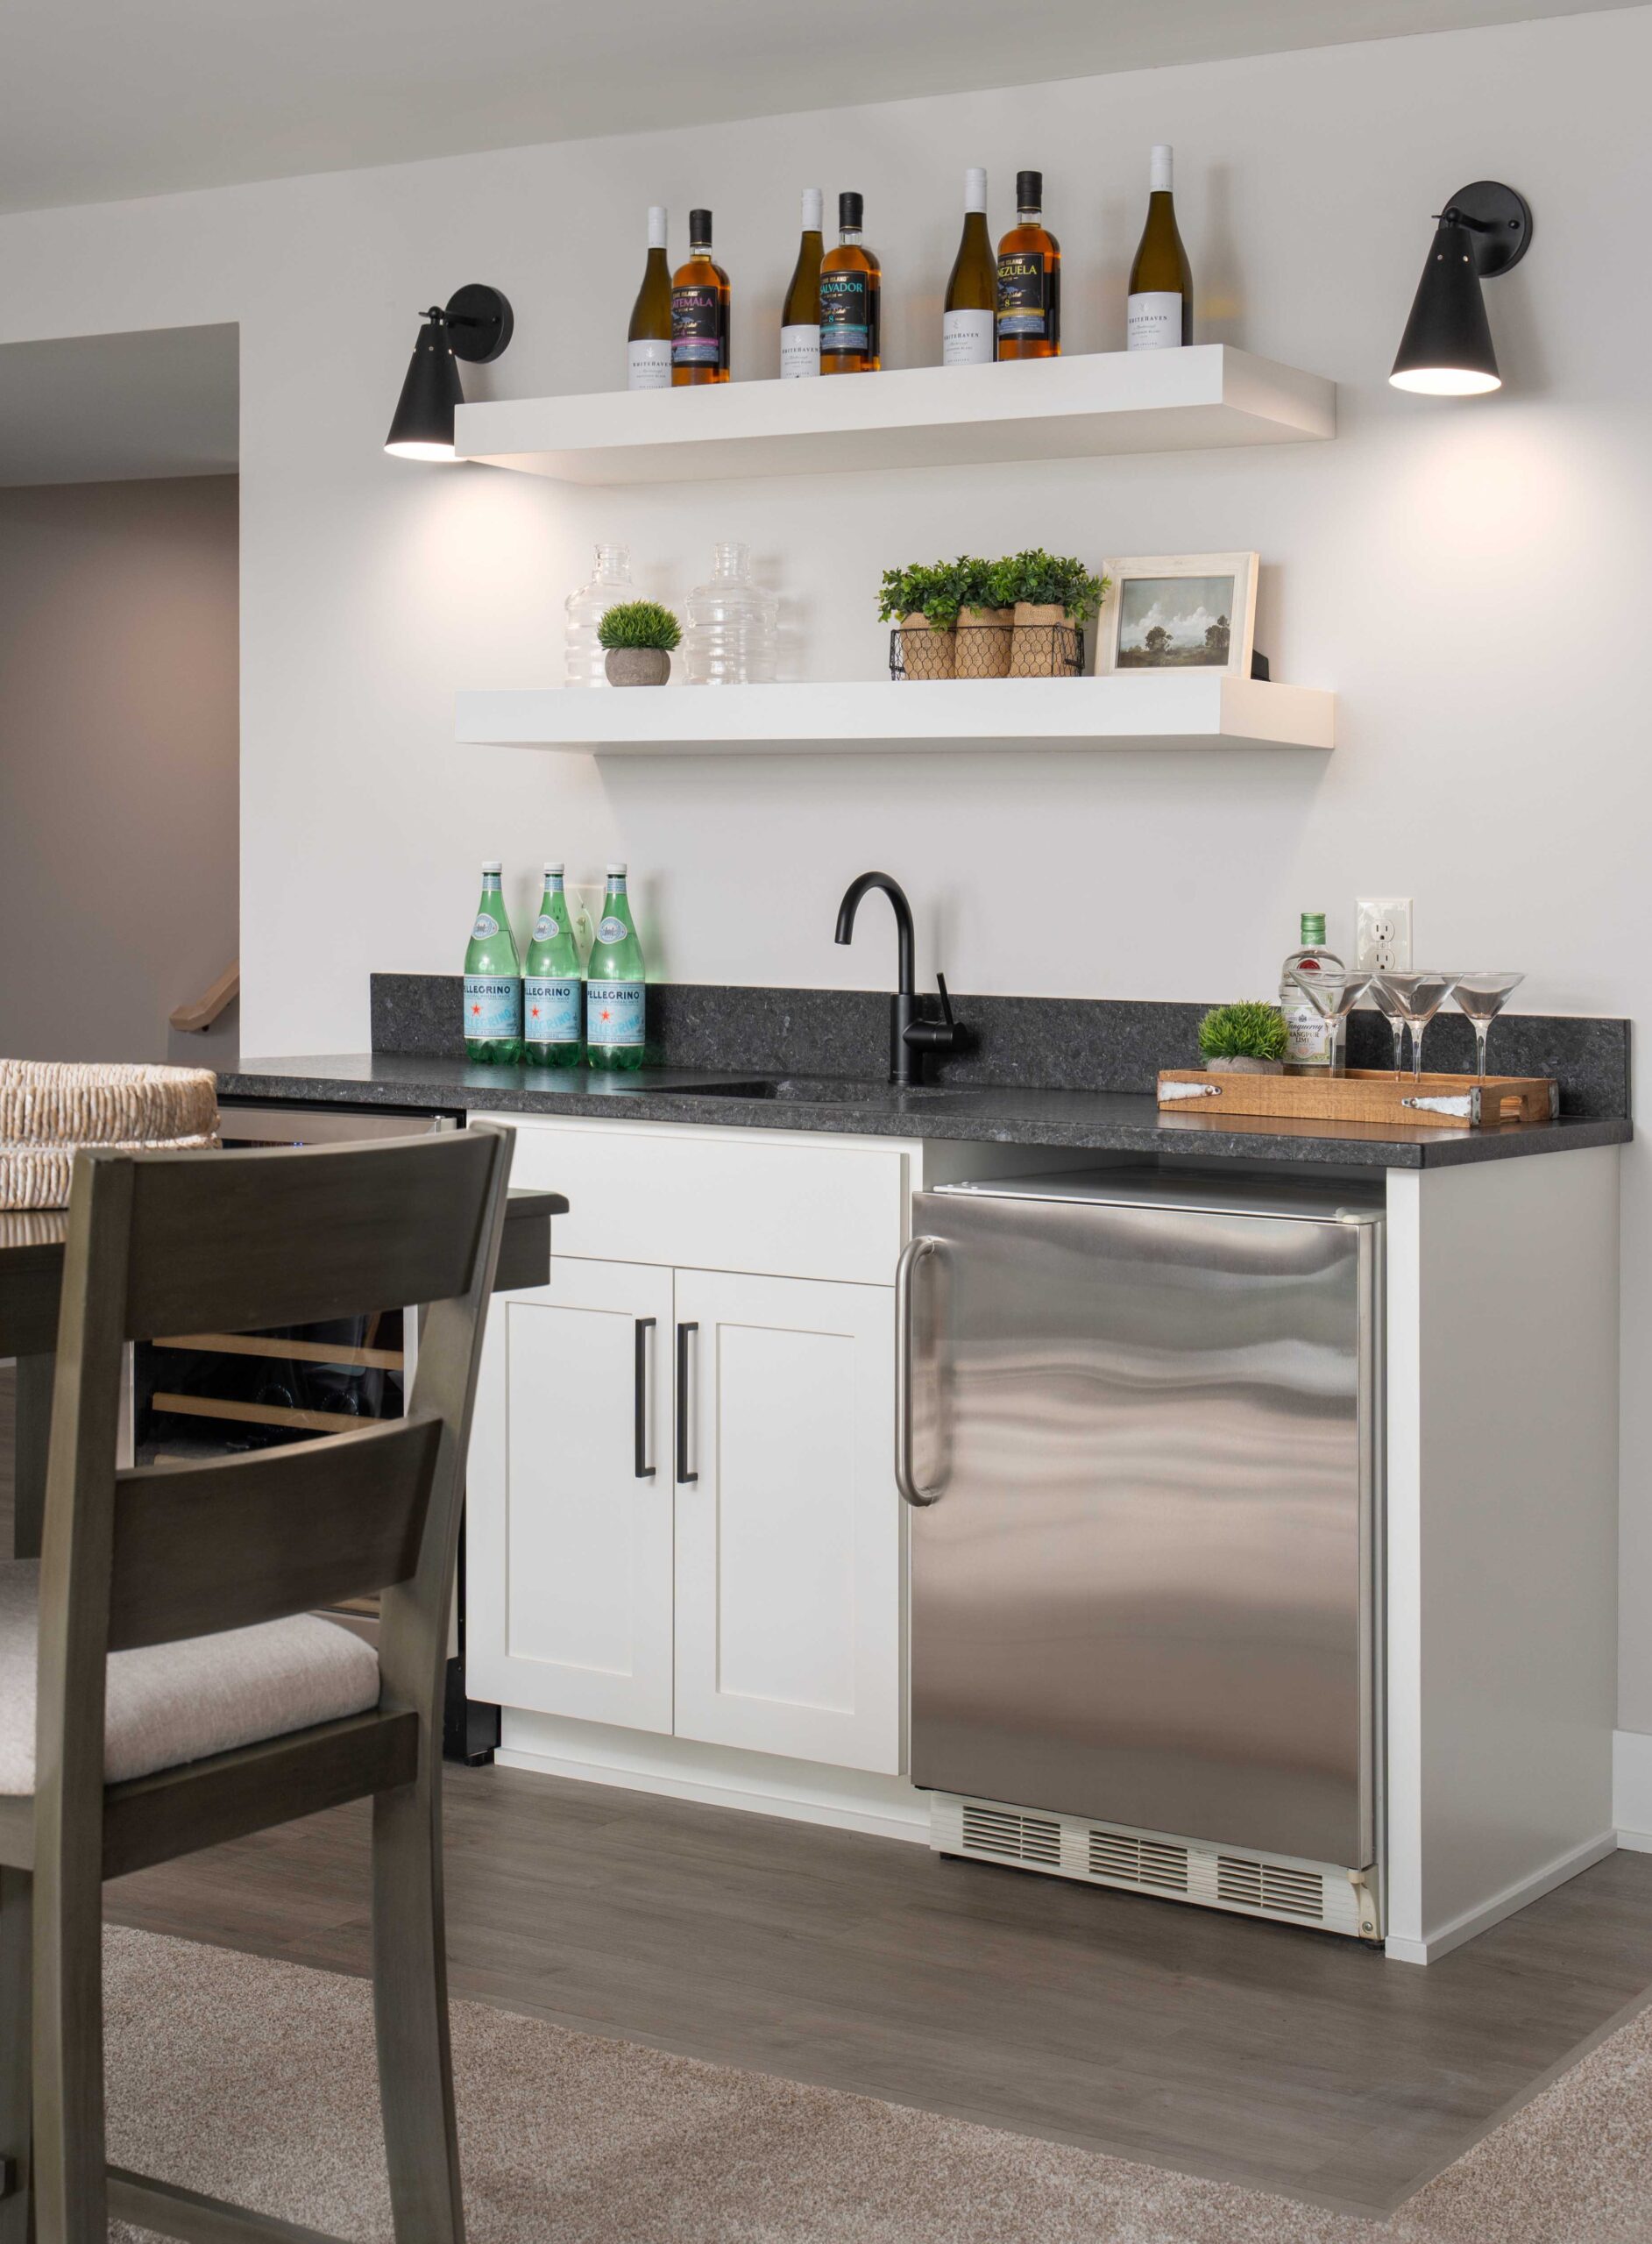 The Orchard Lake Remodel features a kitchen with a refrigerator, sink, and bar stools.